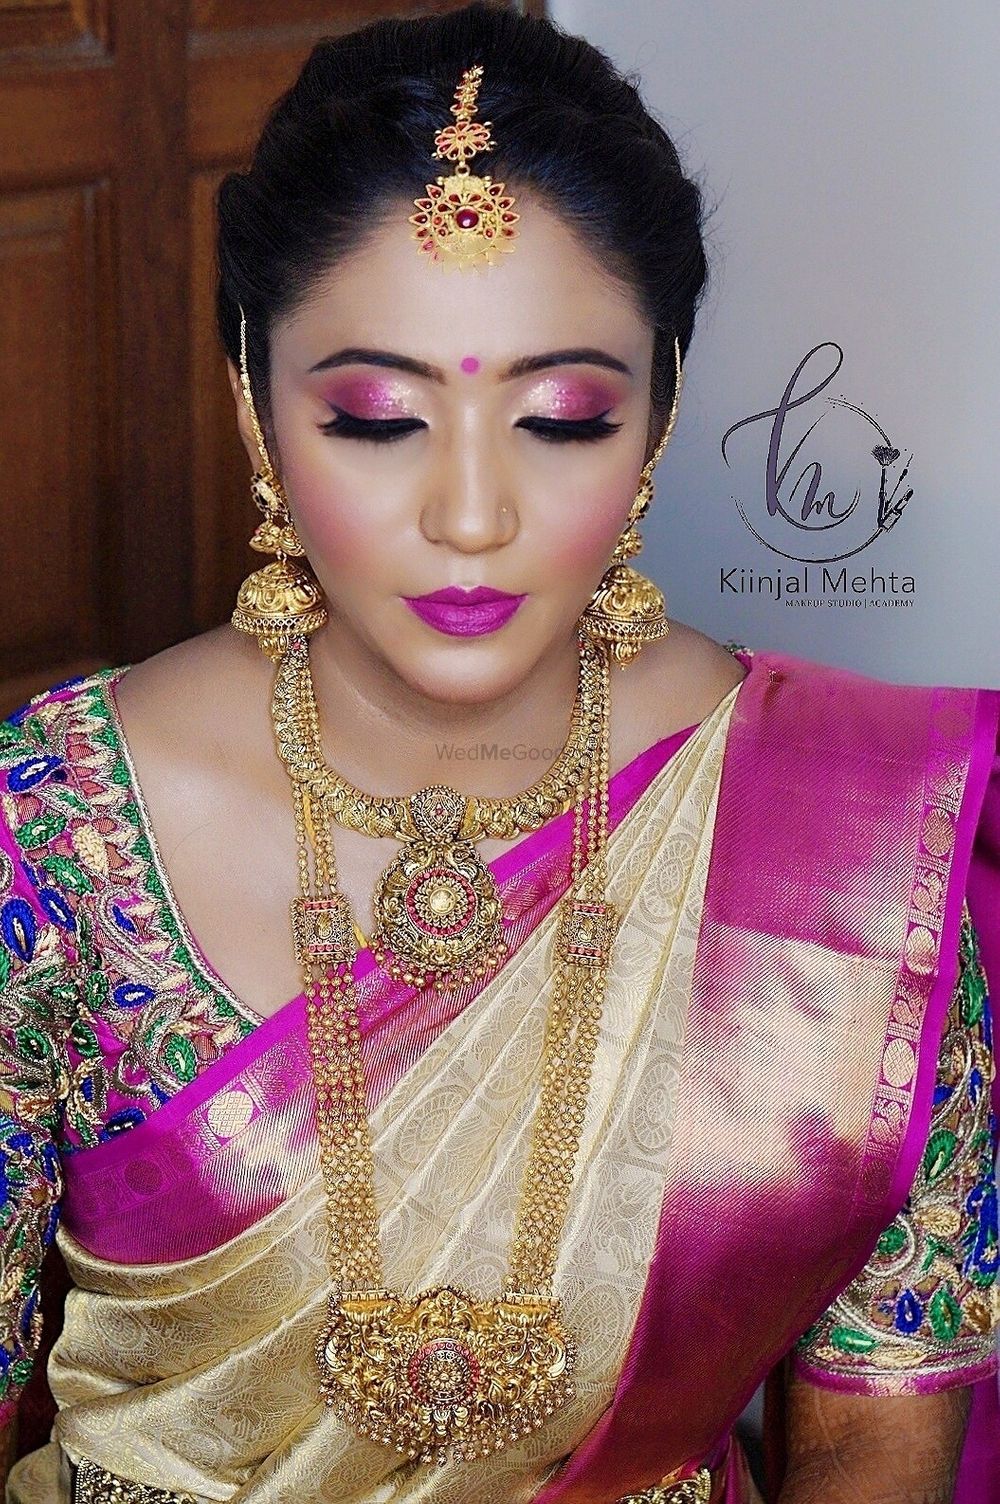 Photo From bride 4 - By Makeup & Hair by Kiinjal Mehta